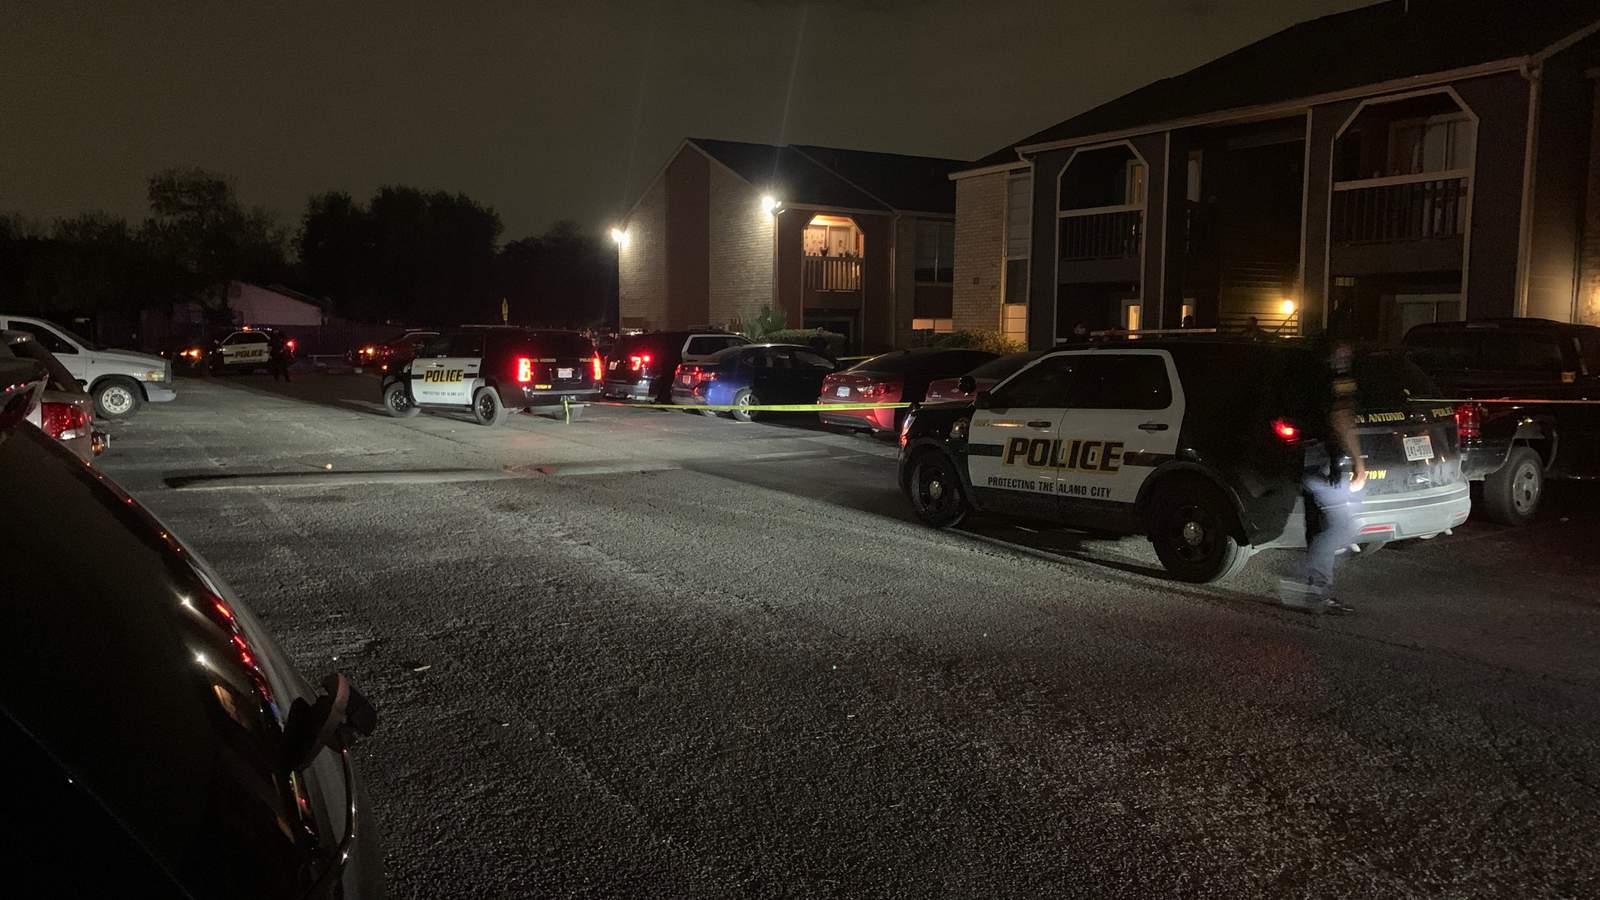 12-year-old boy dies overnight after accidentally shooting himself in head, officials say